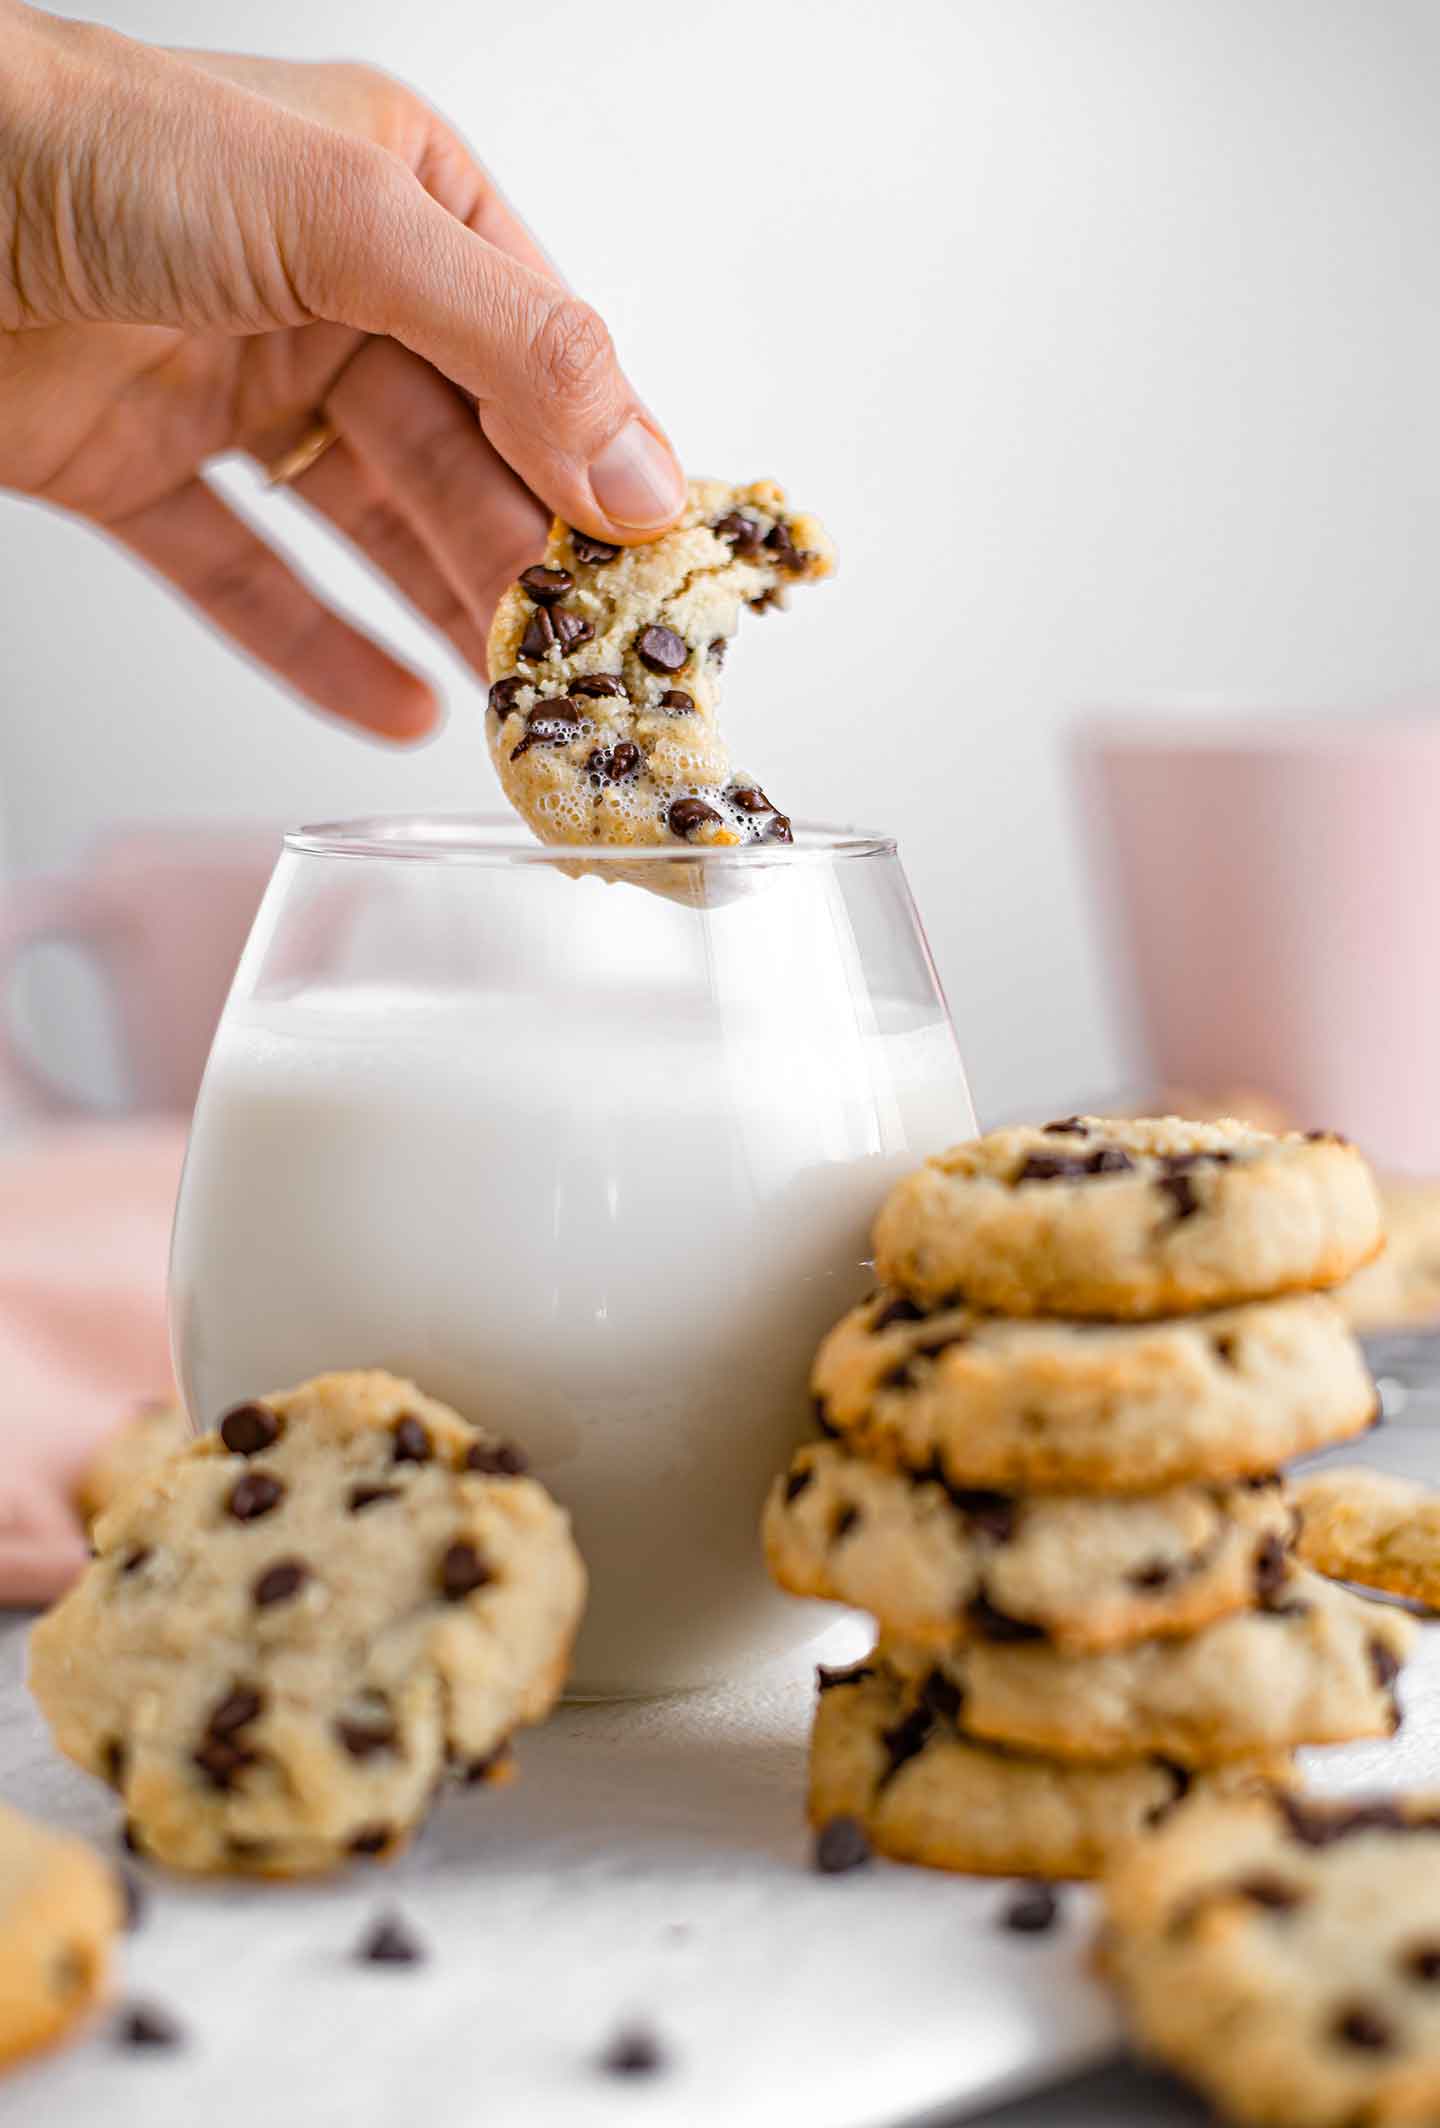 Side view of a chewy chocolate chip cookie with a bite taken out being dipped into a glass of milk. Other cookies are stacked against the glass and scattered around.